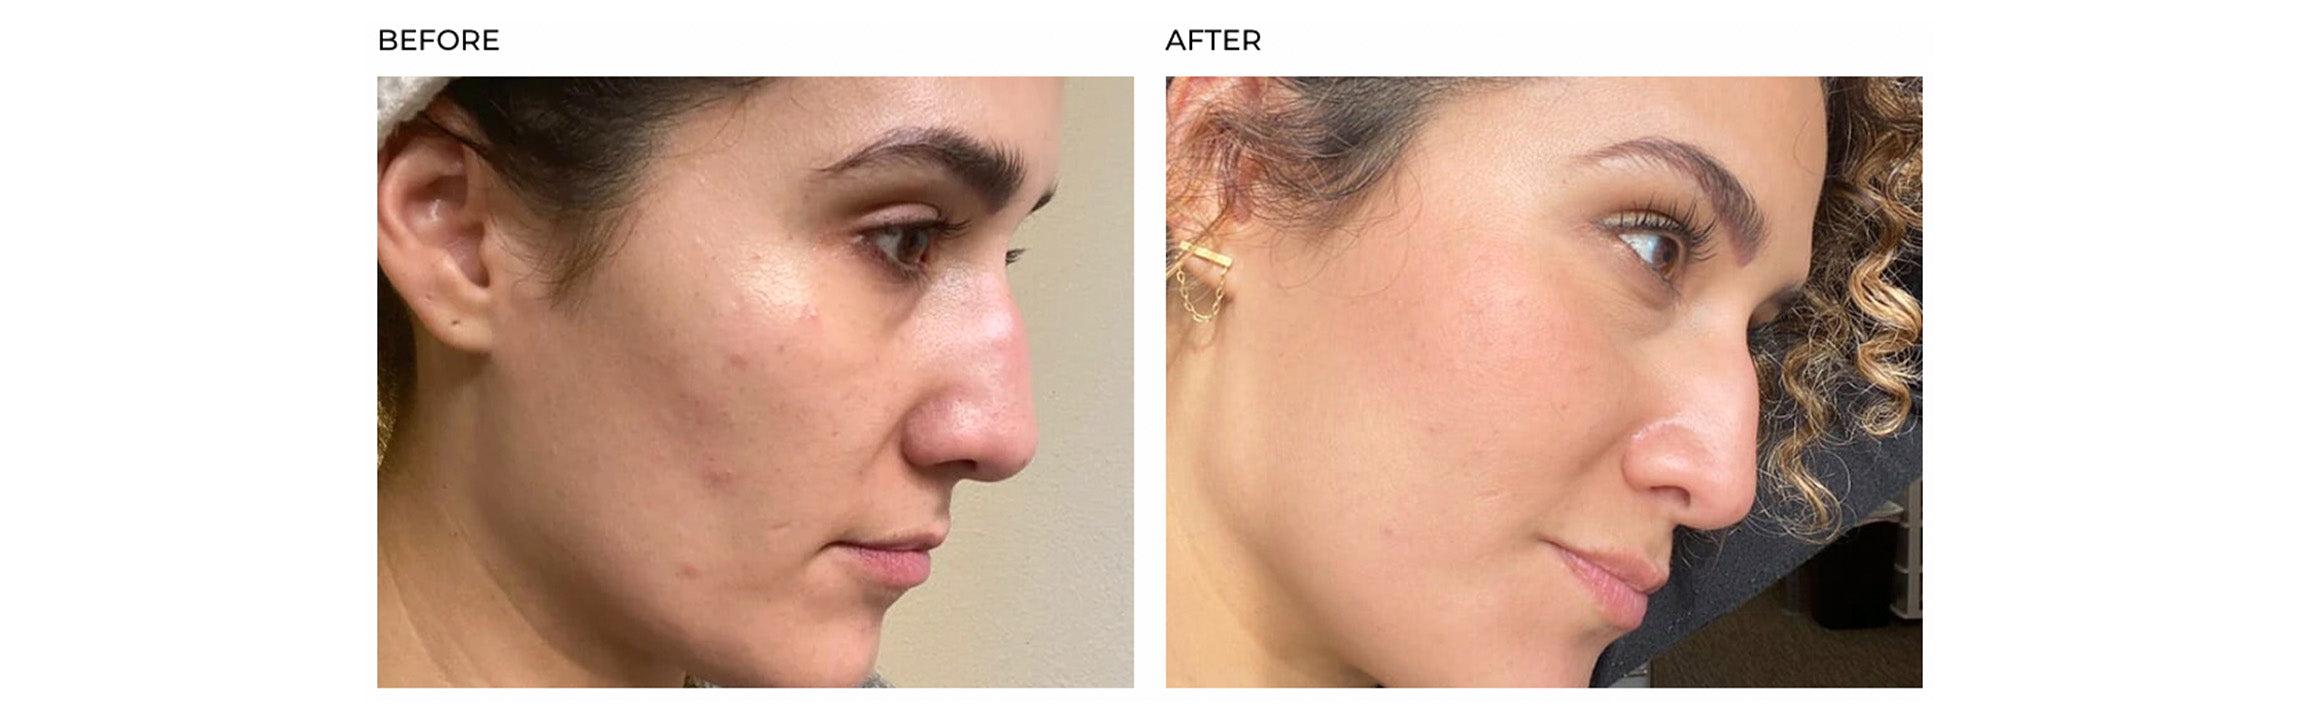 SkinCapsule Clear+ acne results acne before & after 2